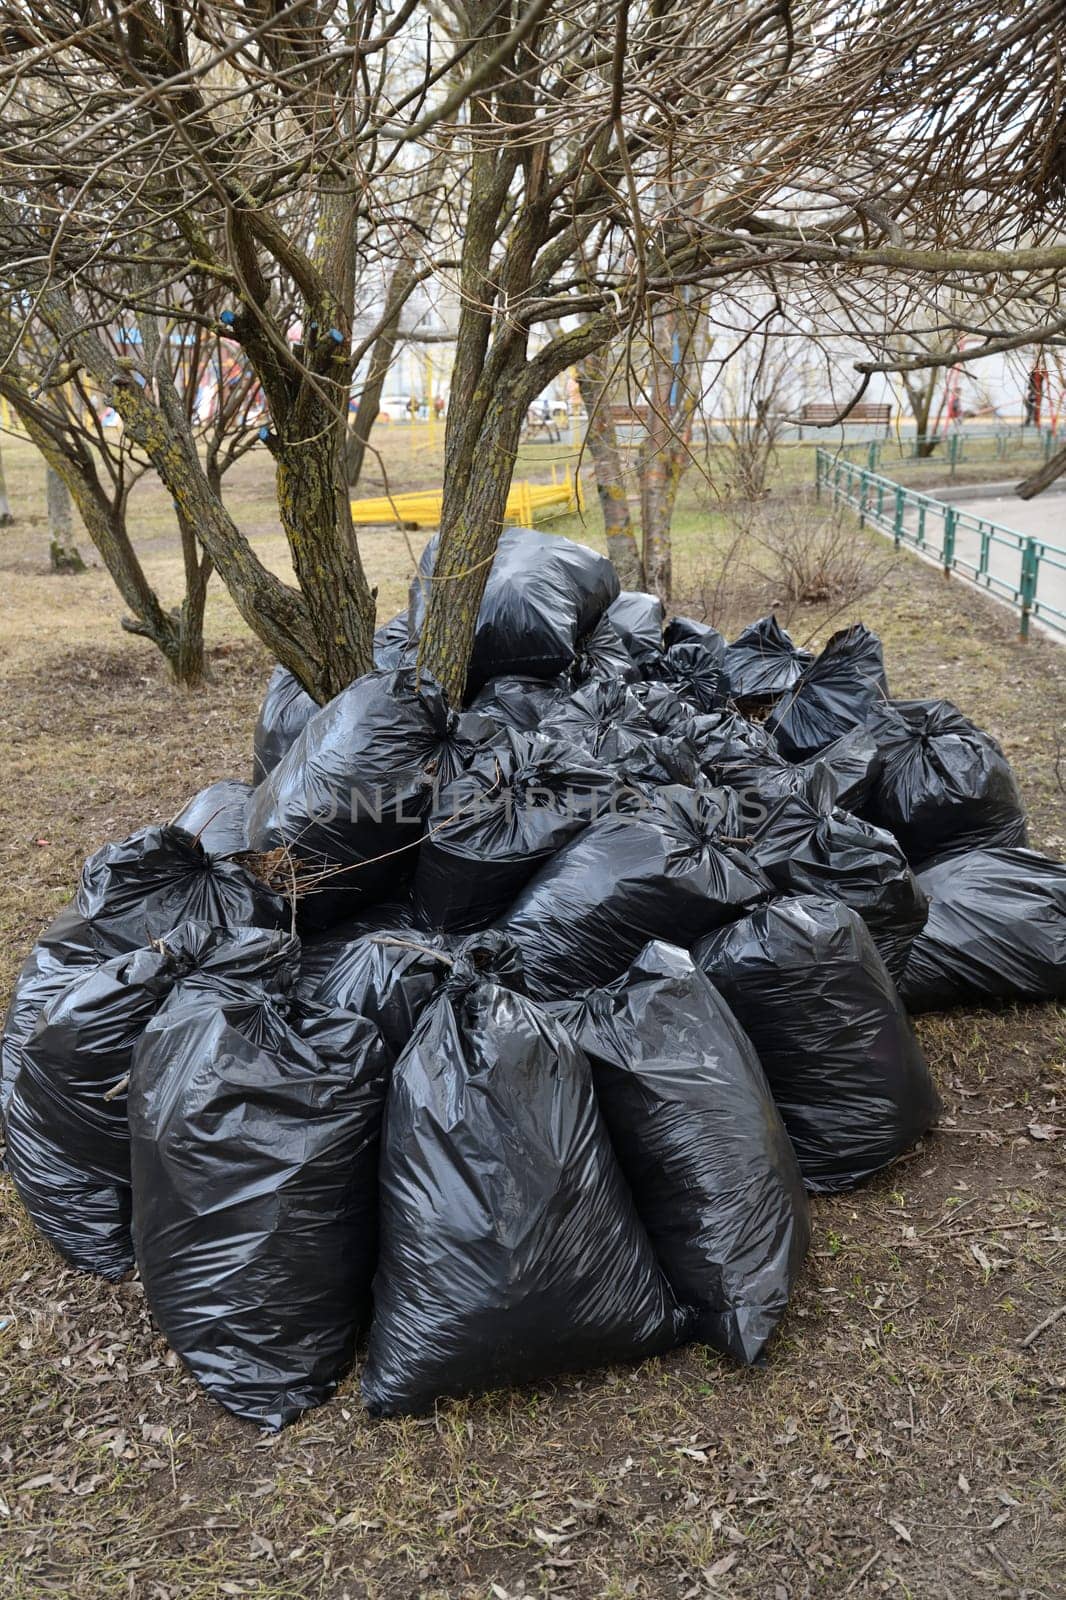 Spring garbage and last year's leaves in black bags near the tree by olgavolodina